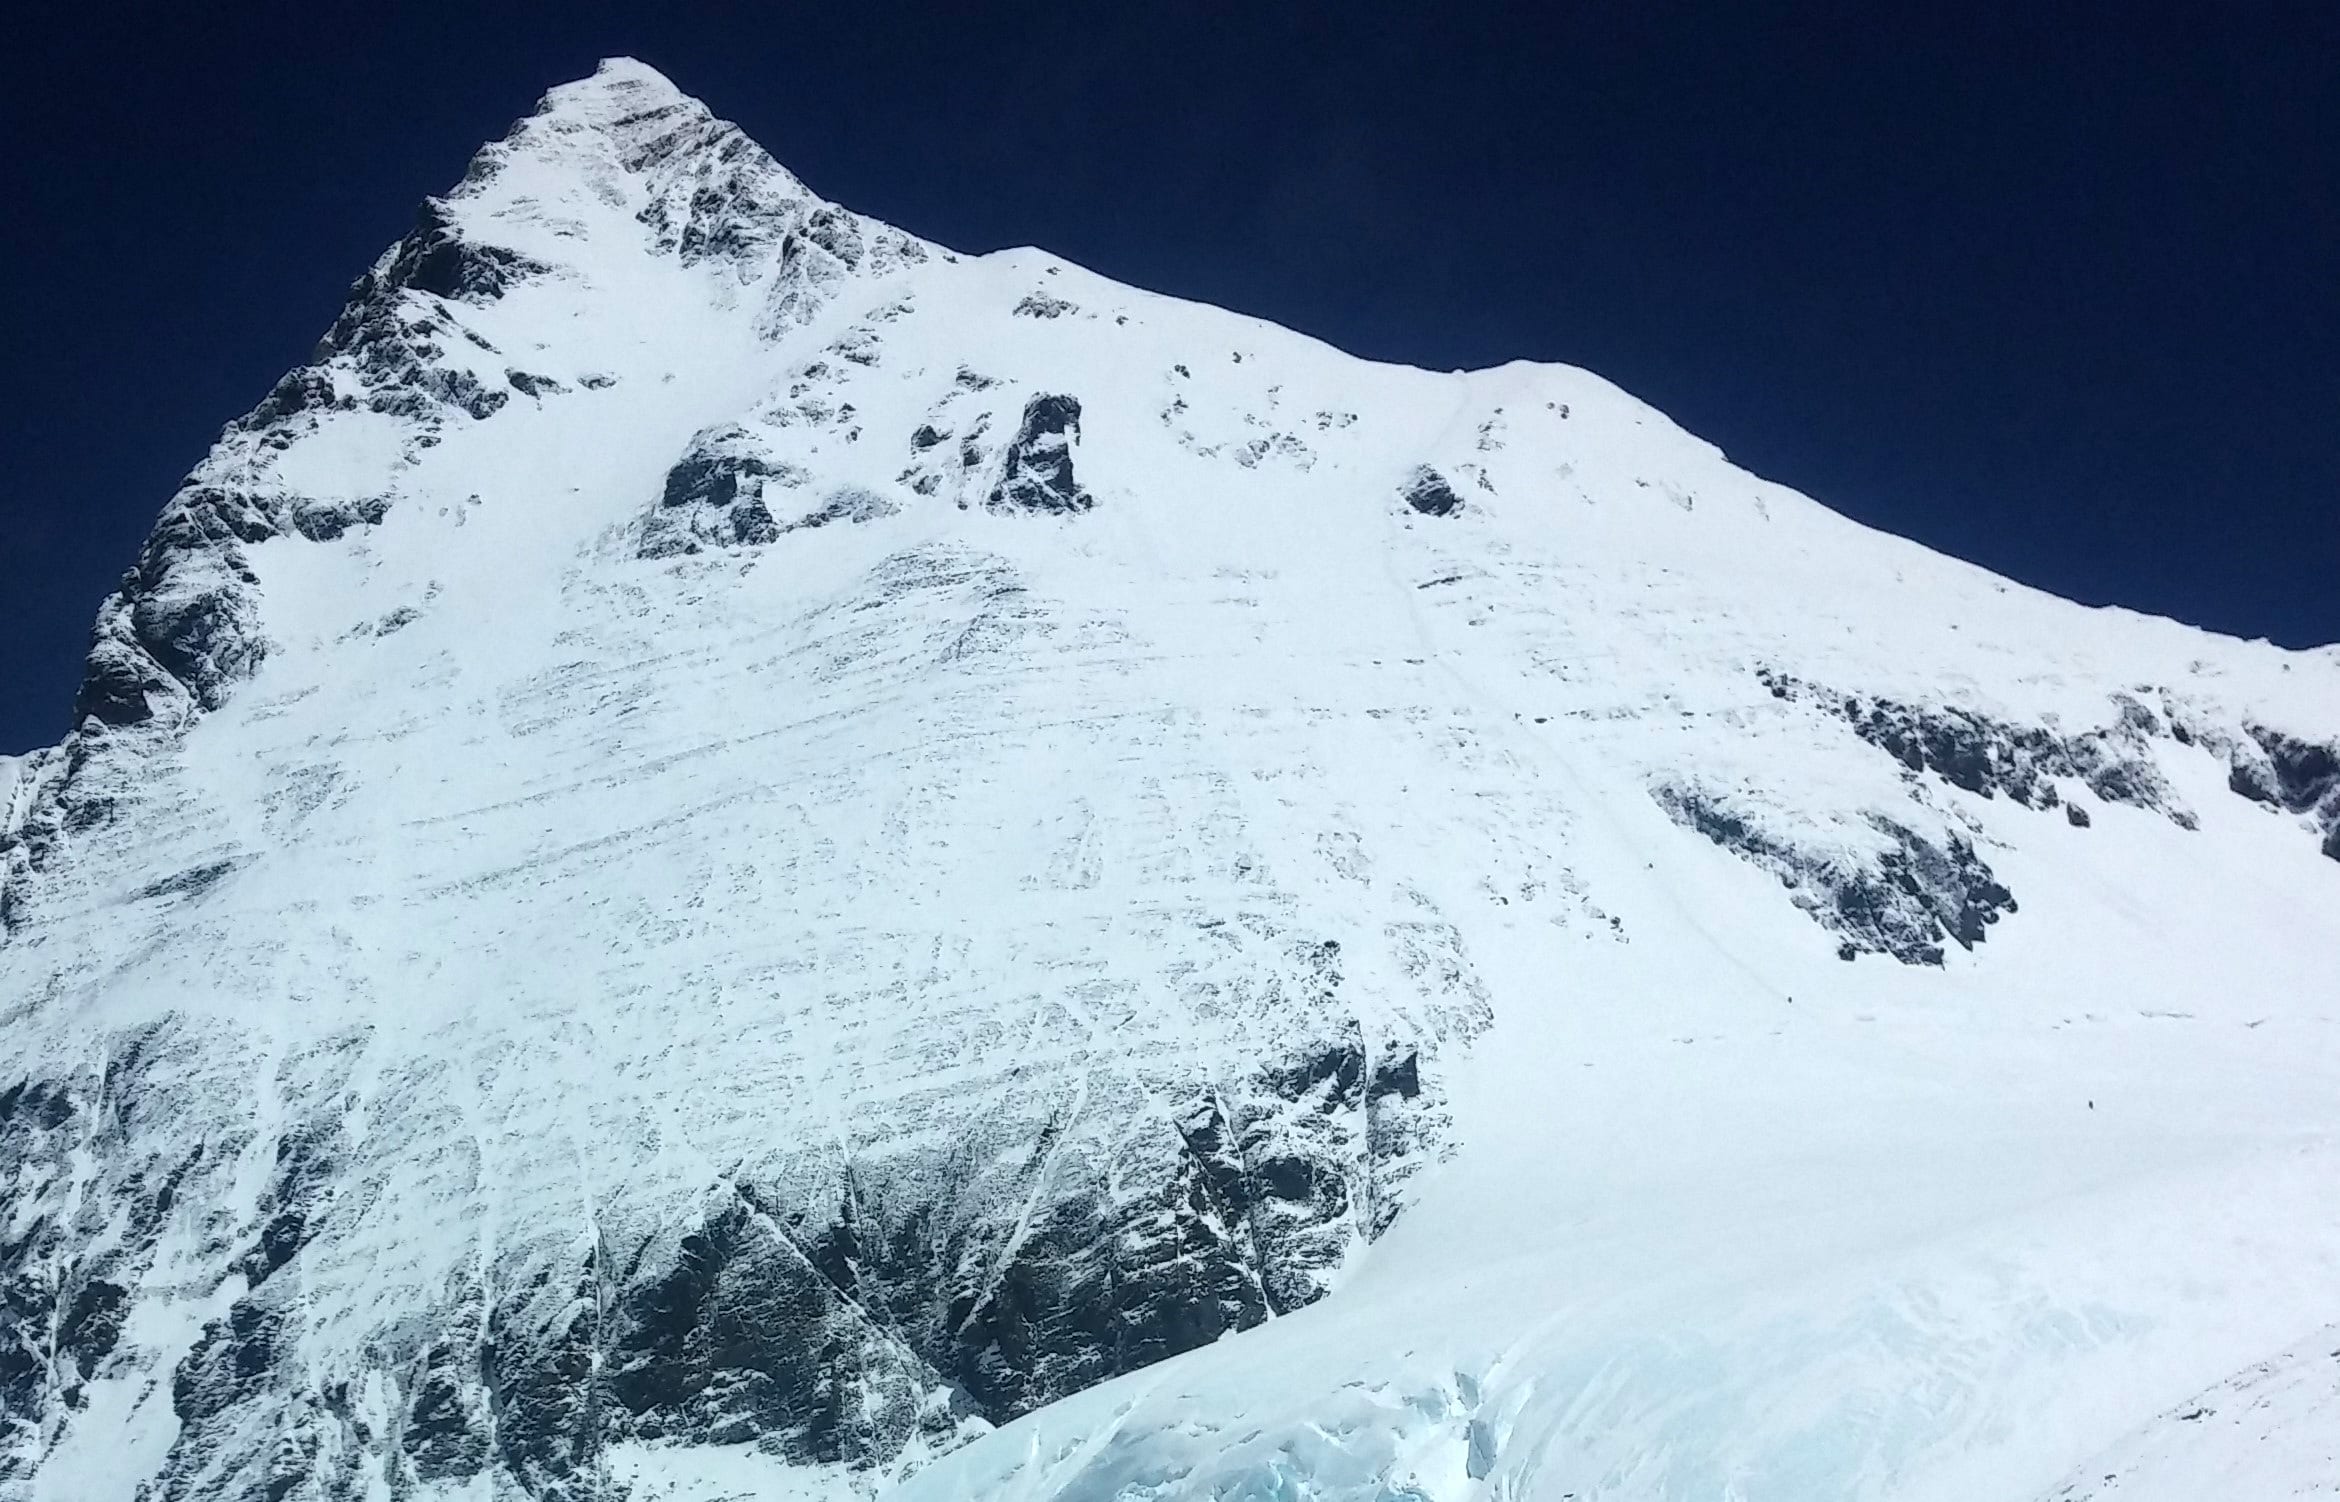 This photograph taken on May 12, 2016, shows a view of South Col near the summit of Mount Everest.